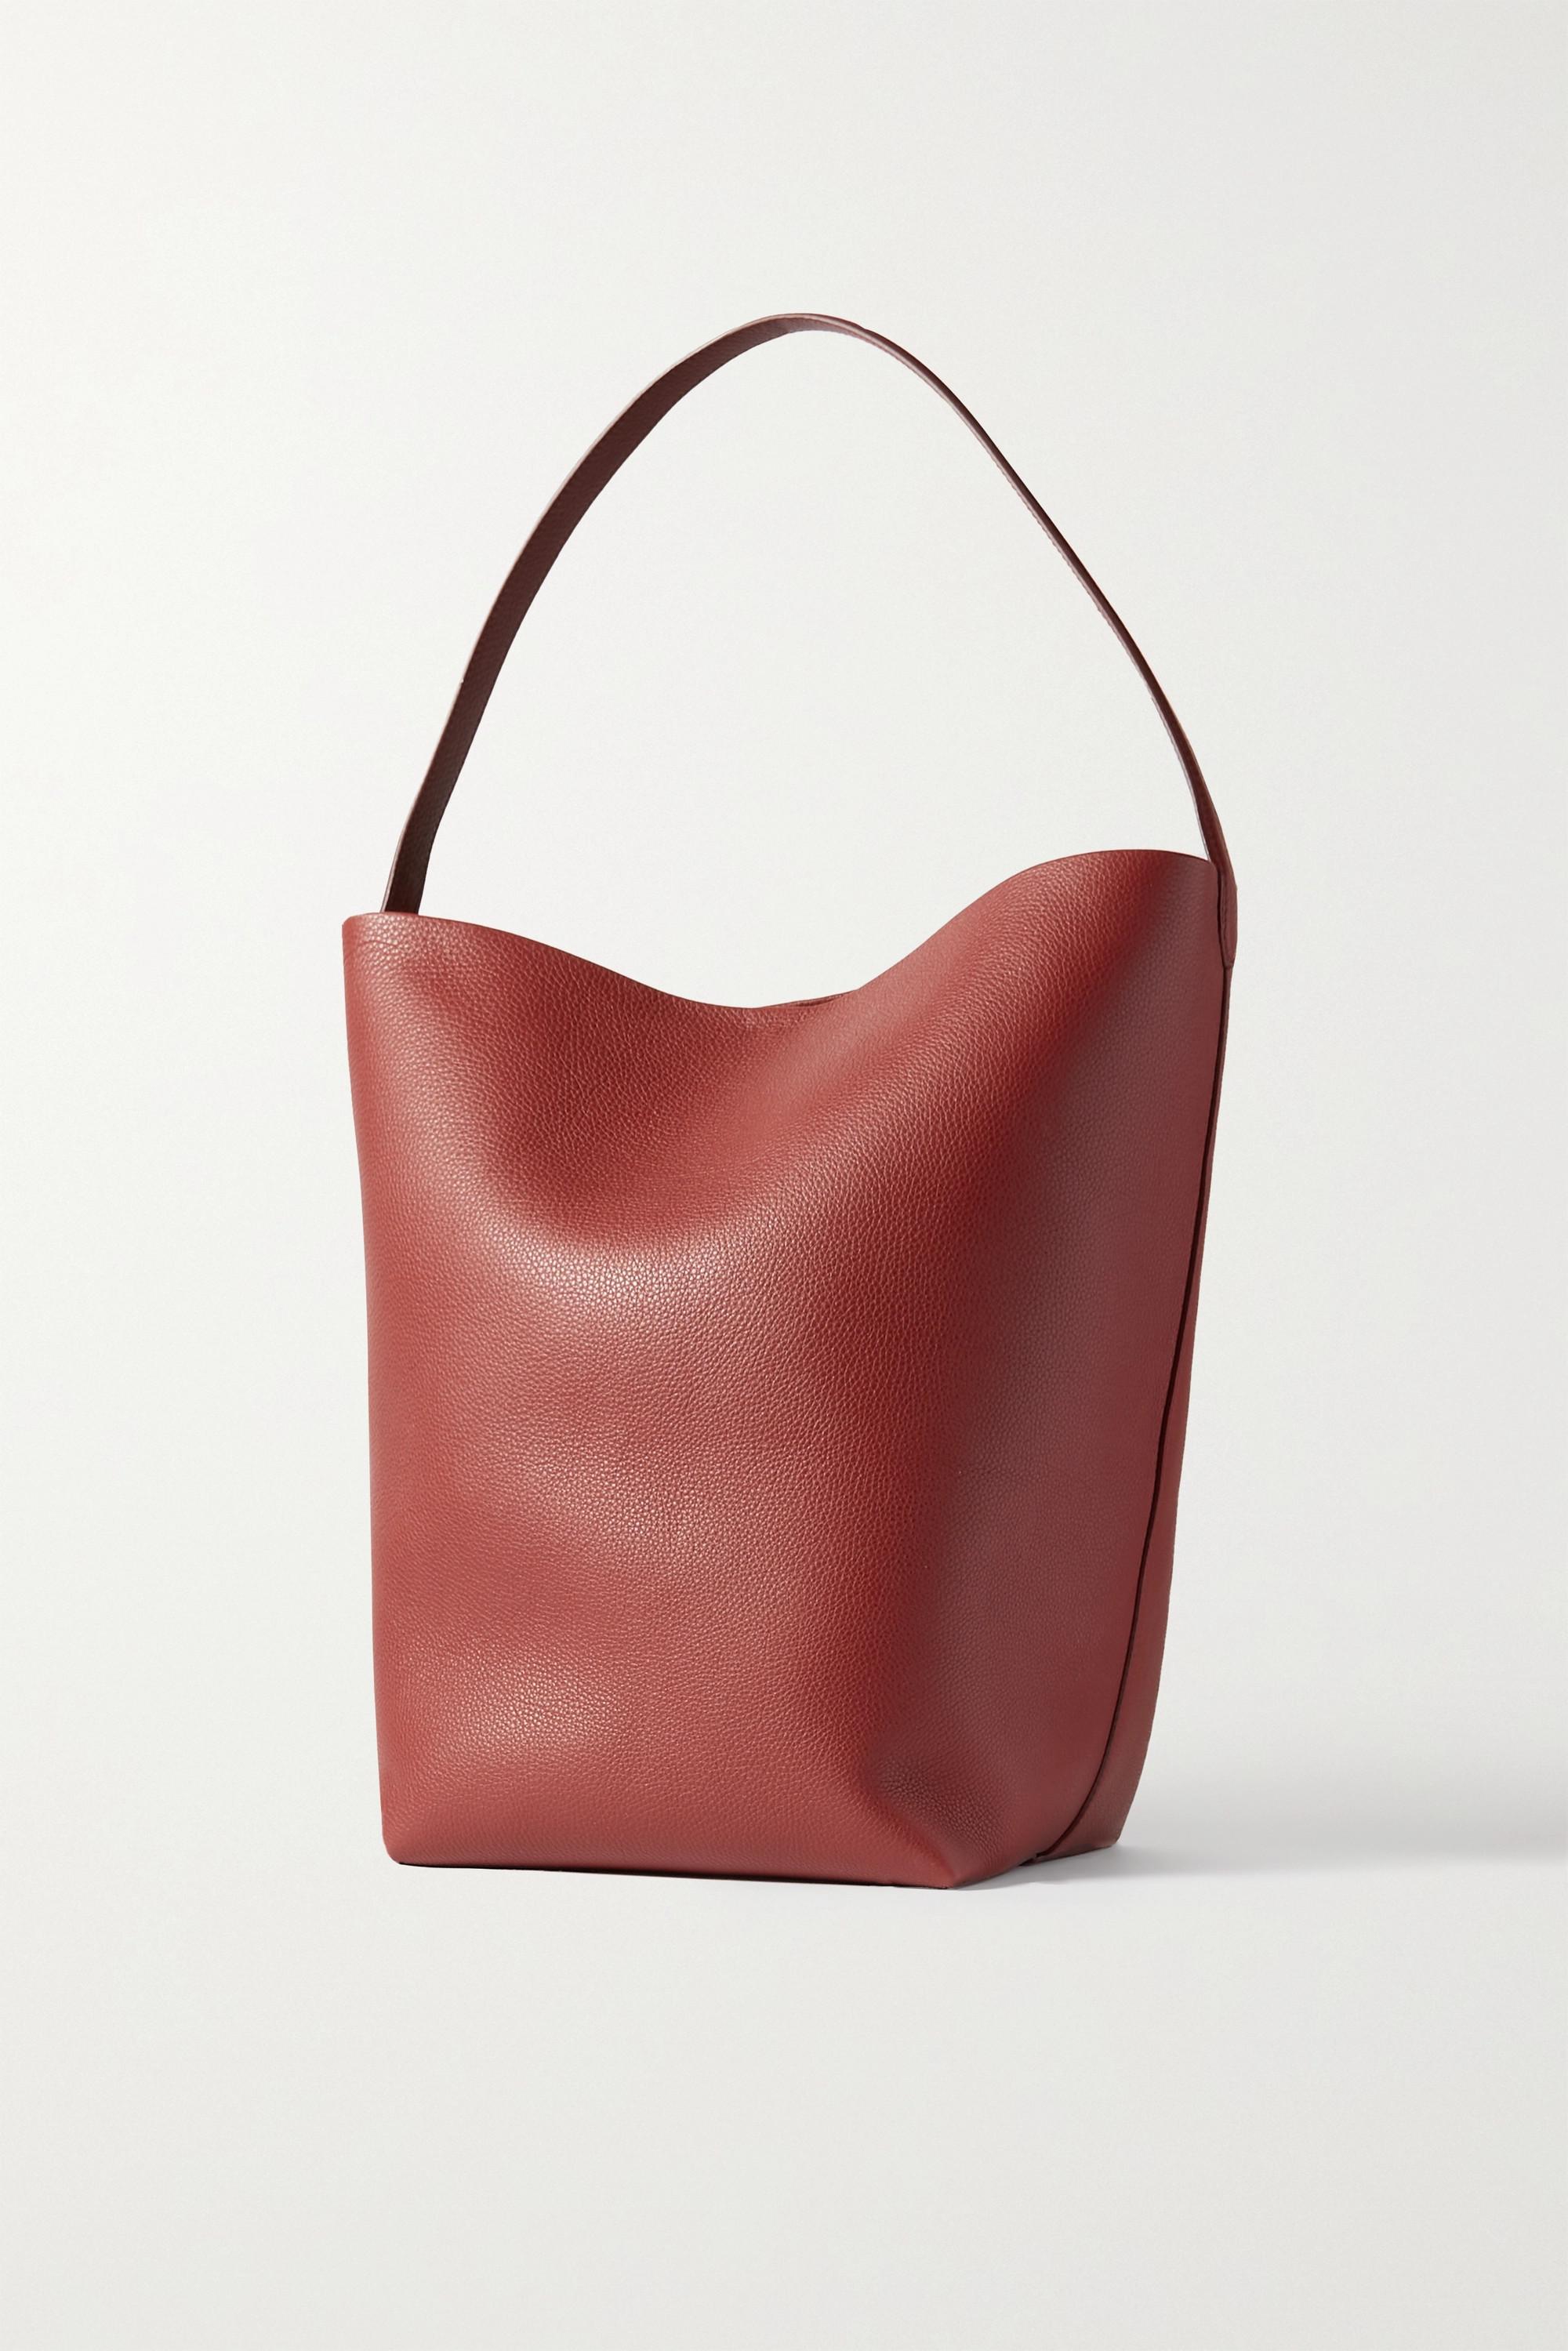 N S Park Small Leather Tote Bag in Red - The Row